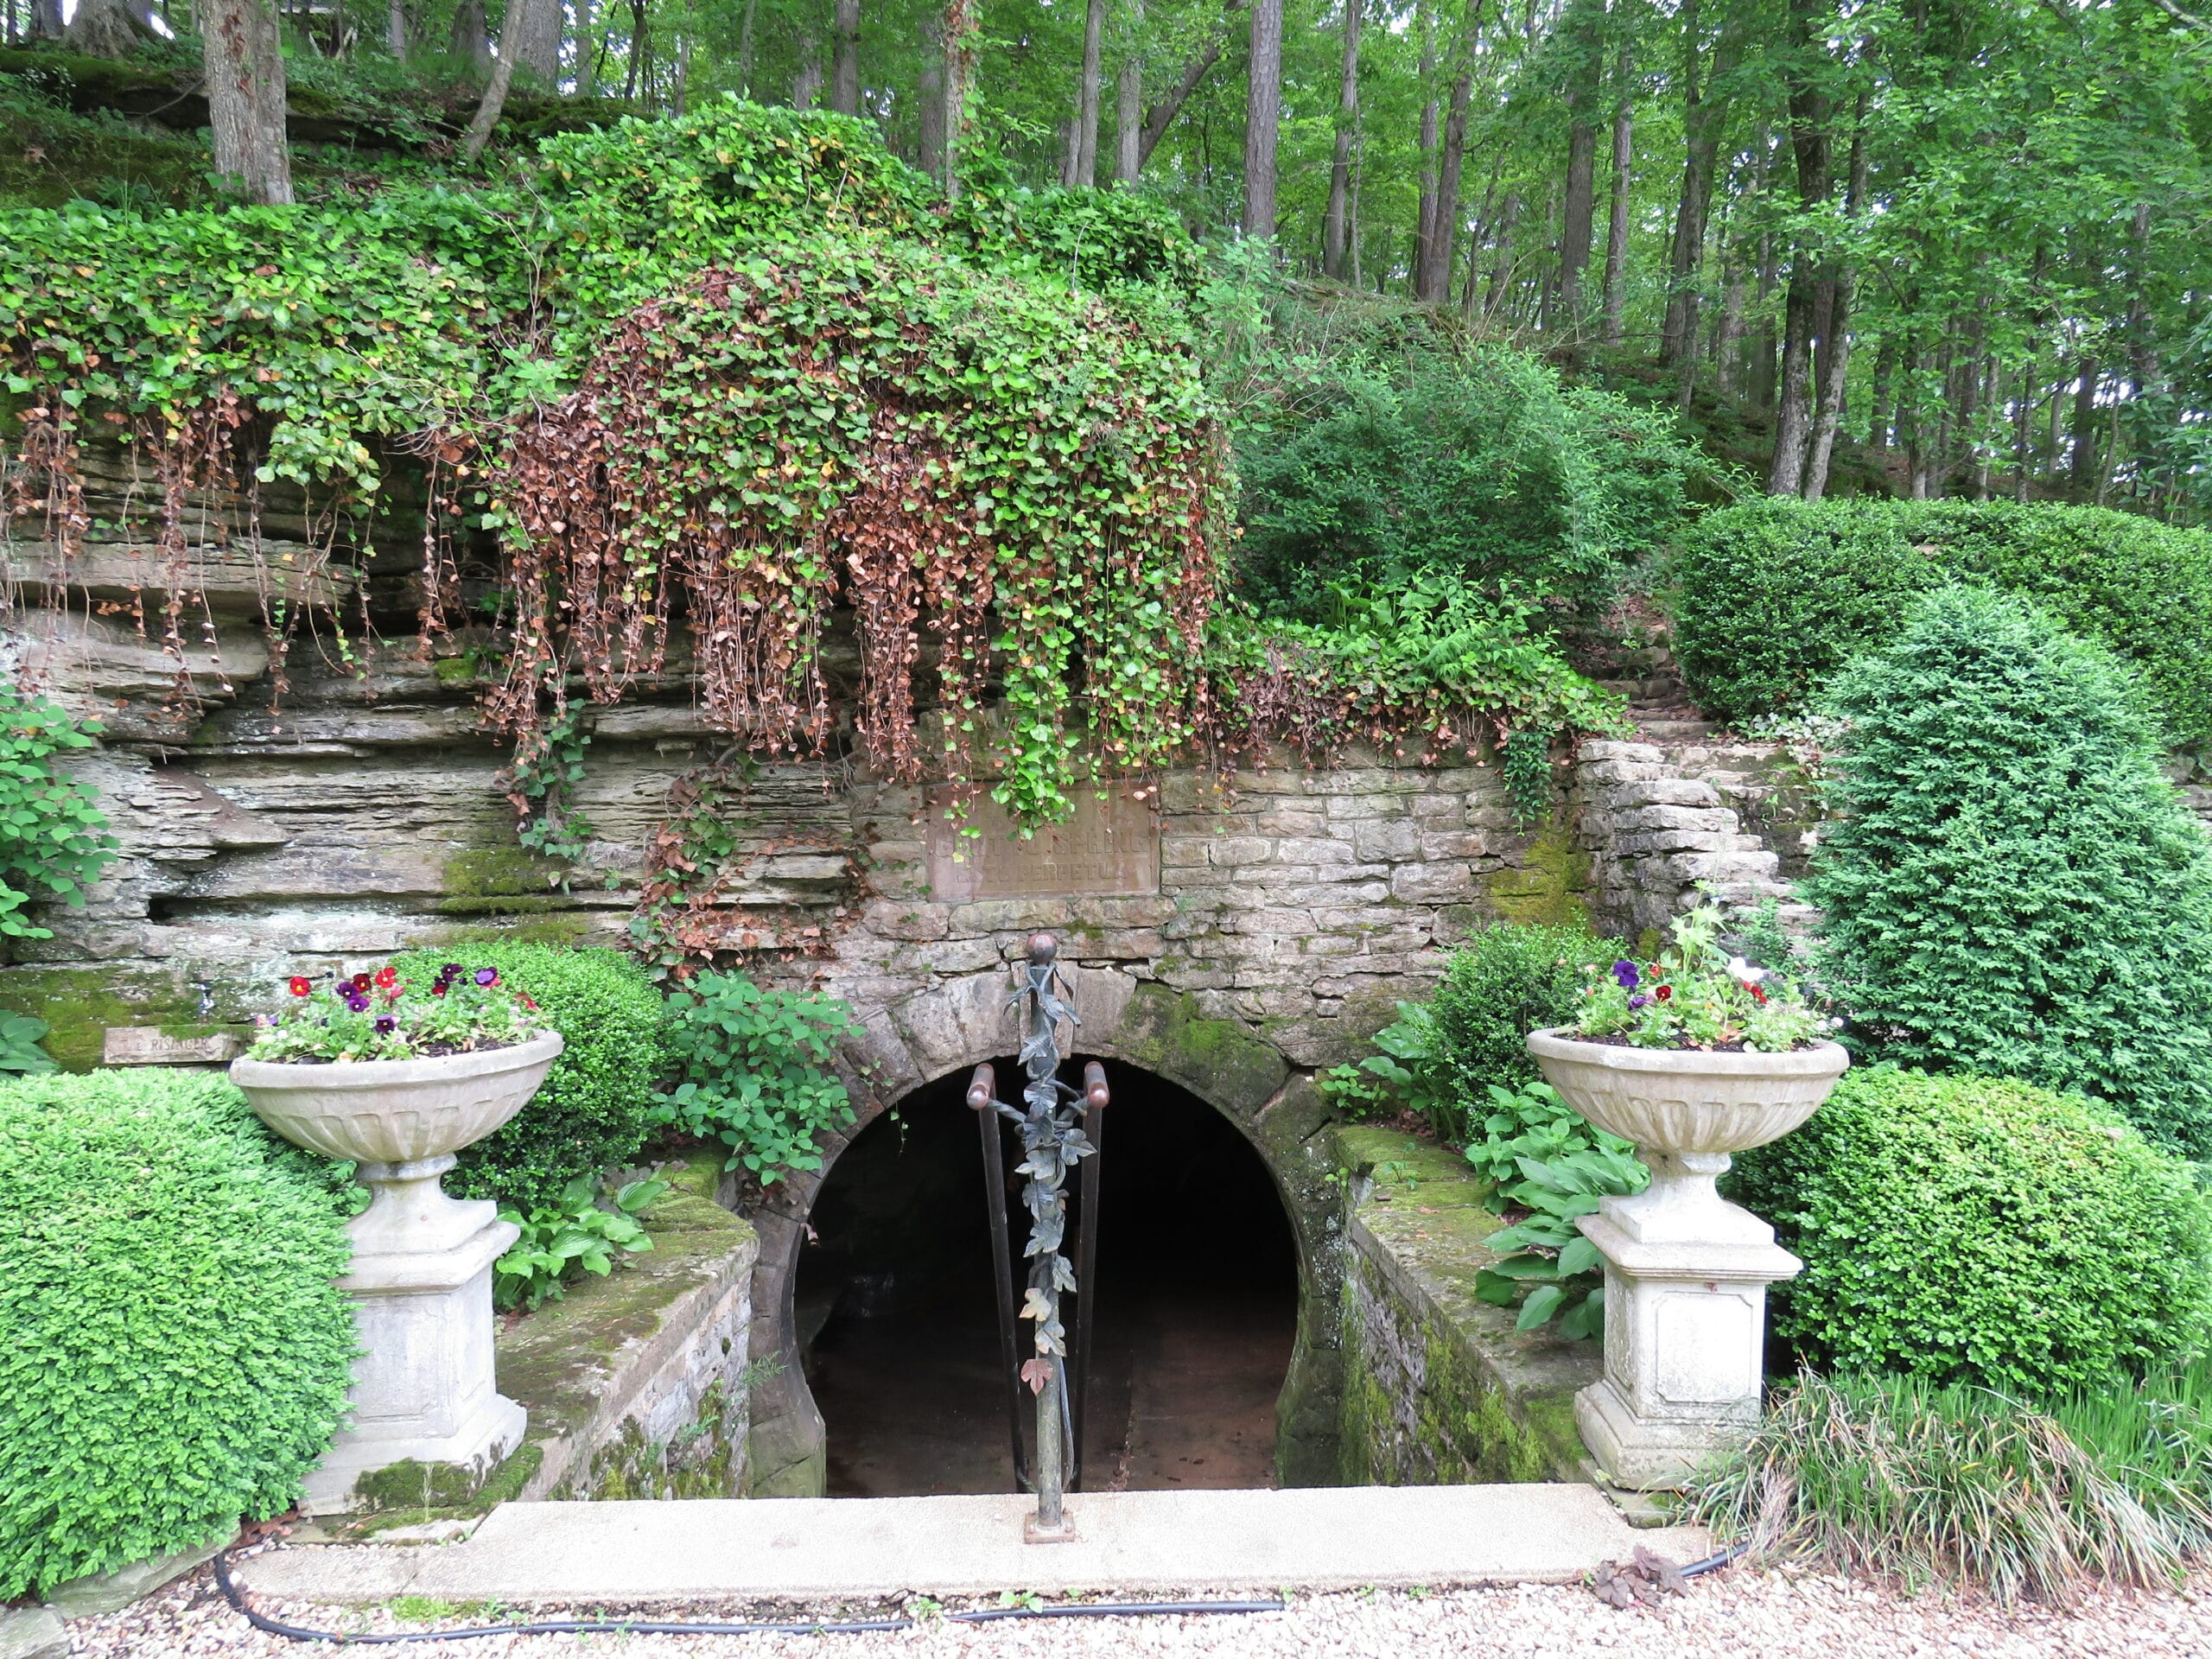 Entrance to a cave spring with greenery surrounding the opening